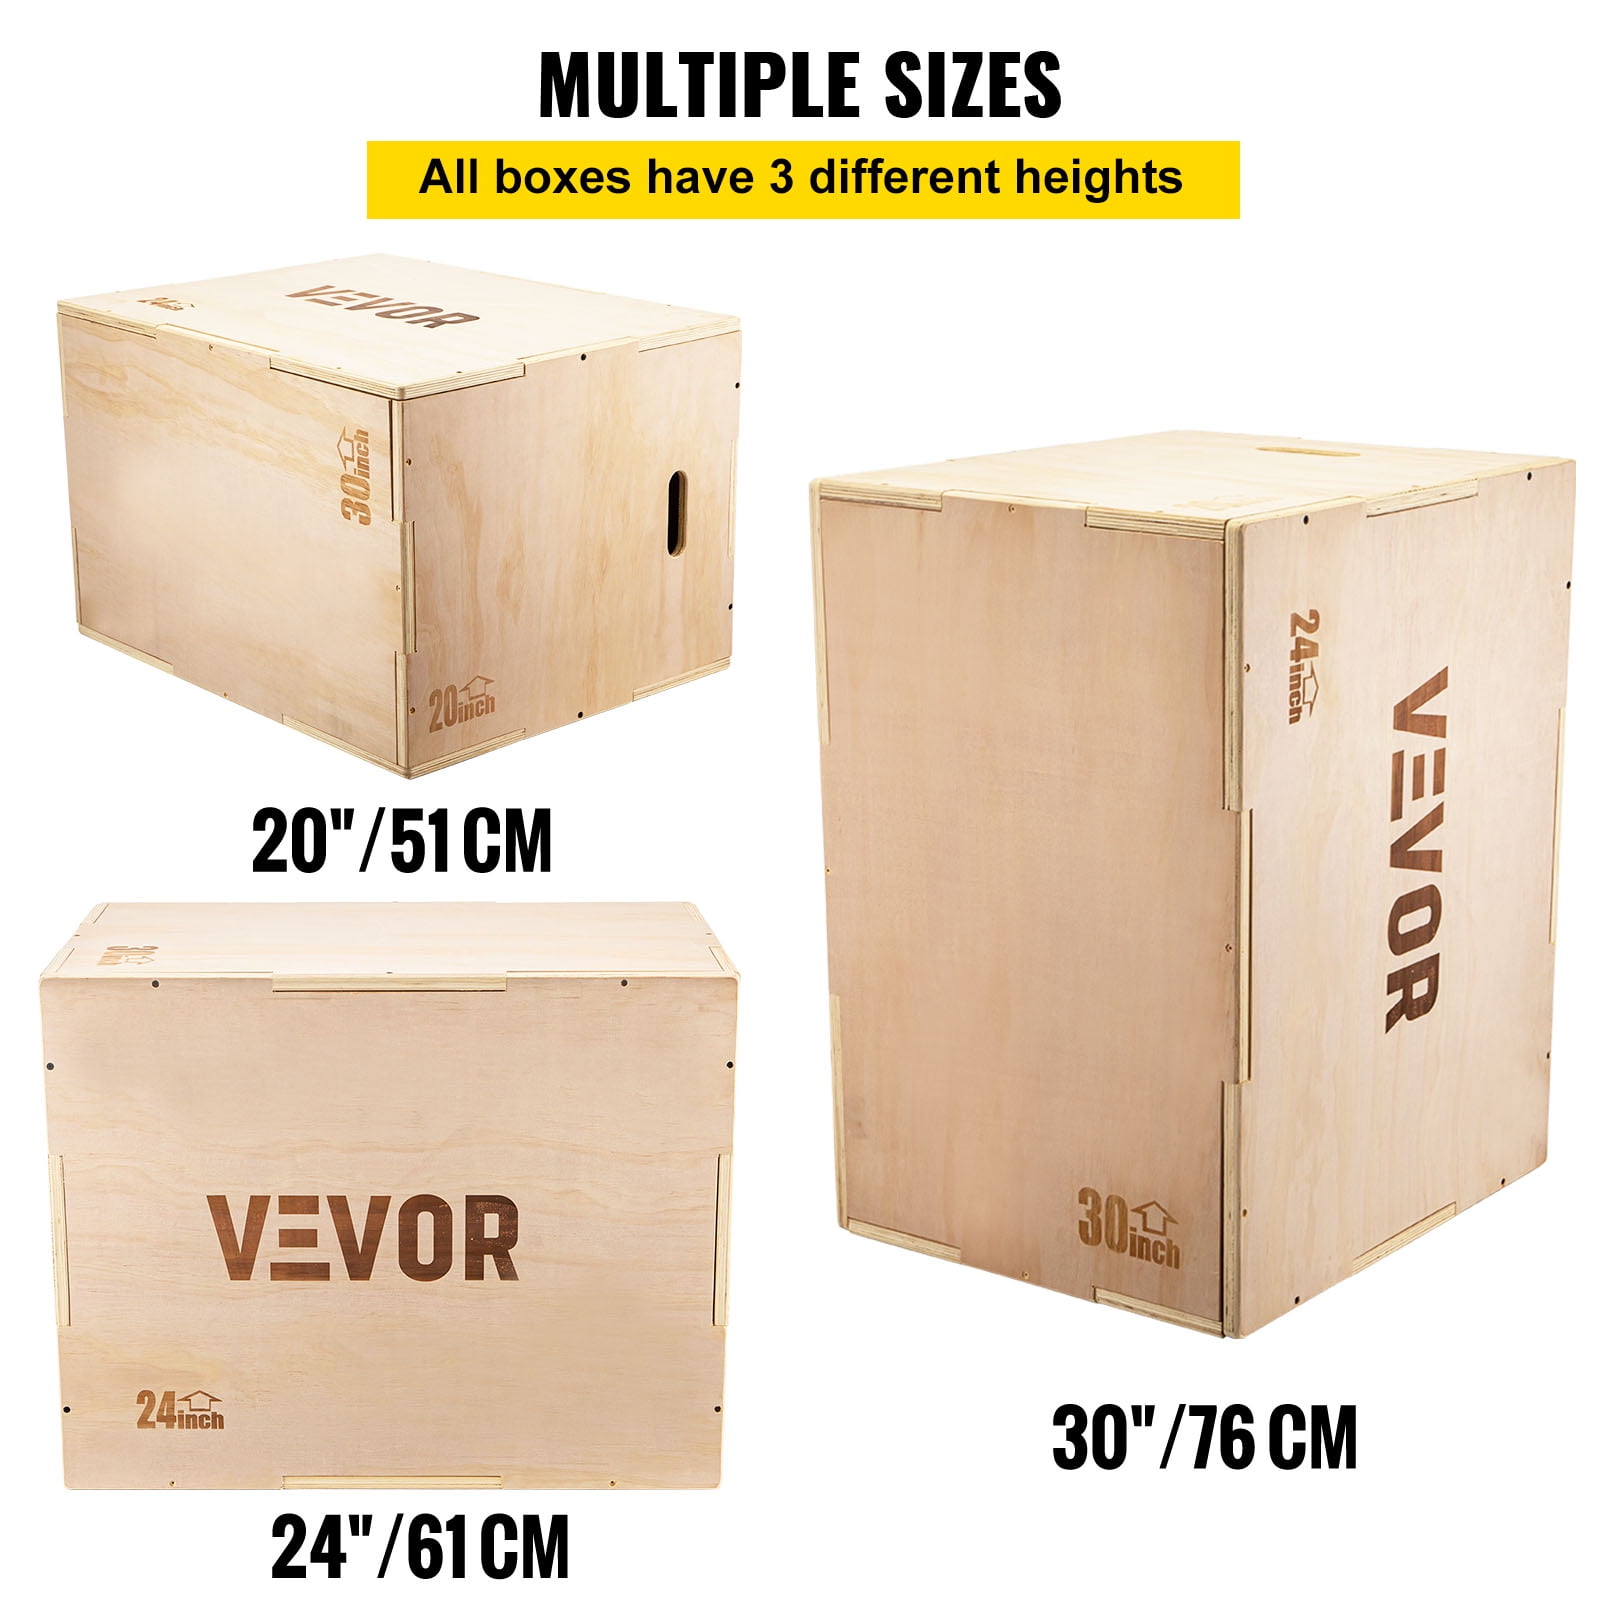 VEVOR 3 in 1 Wood Plyo Box,30x24x20 Plyometric Jump Box,Easy-to-Assemble Plyo Box for Jumping Trainers,Training and Conditioning 